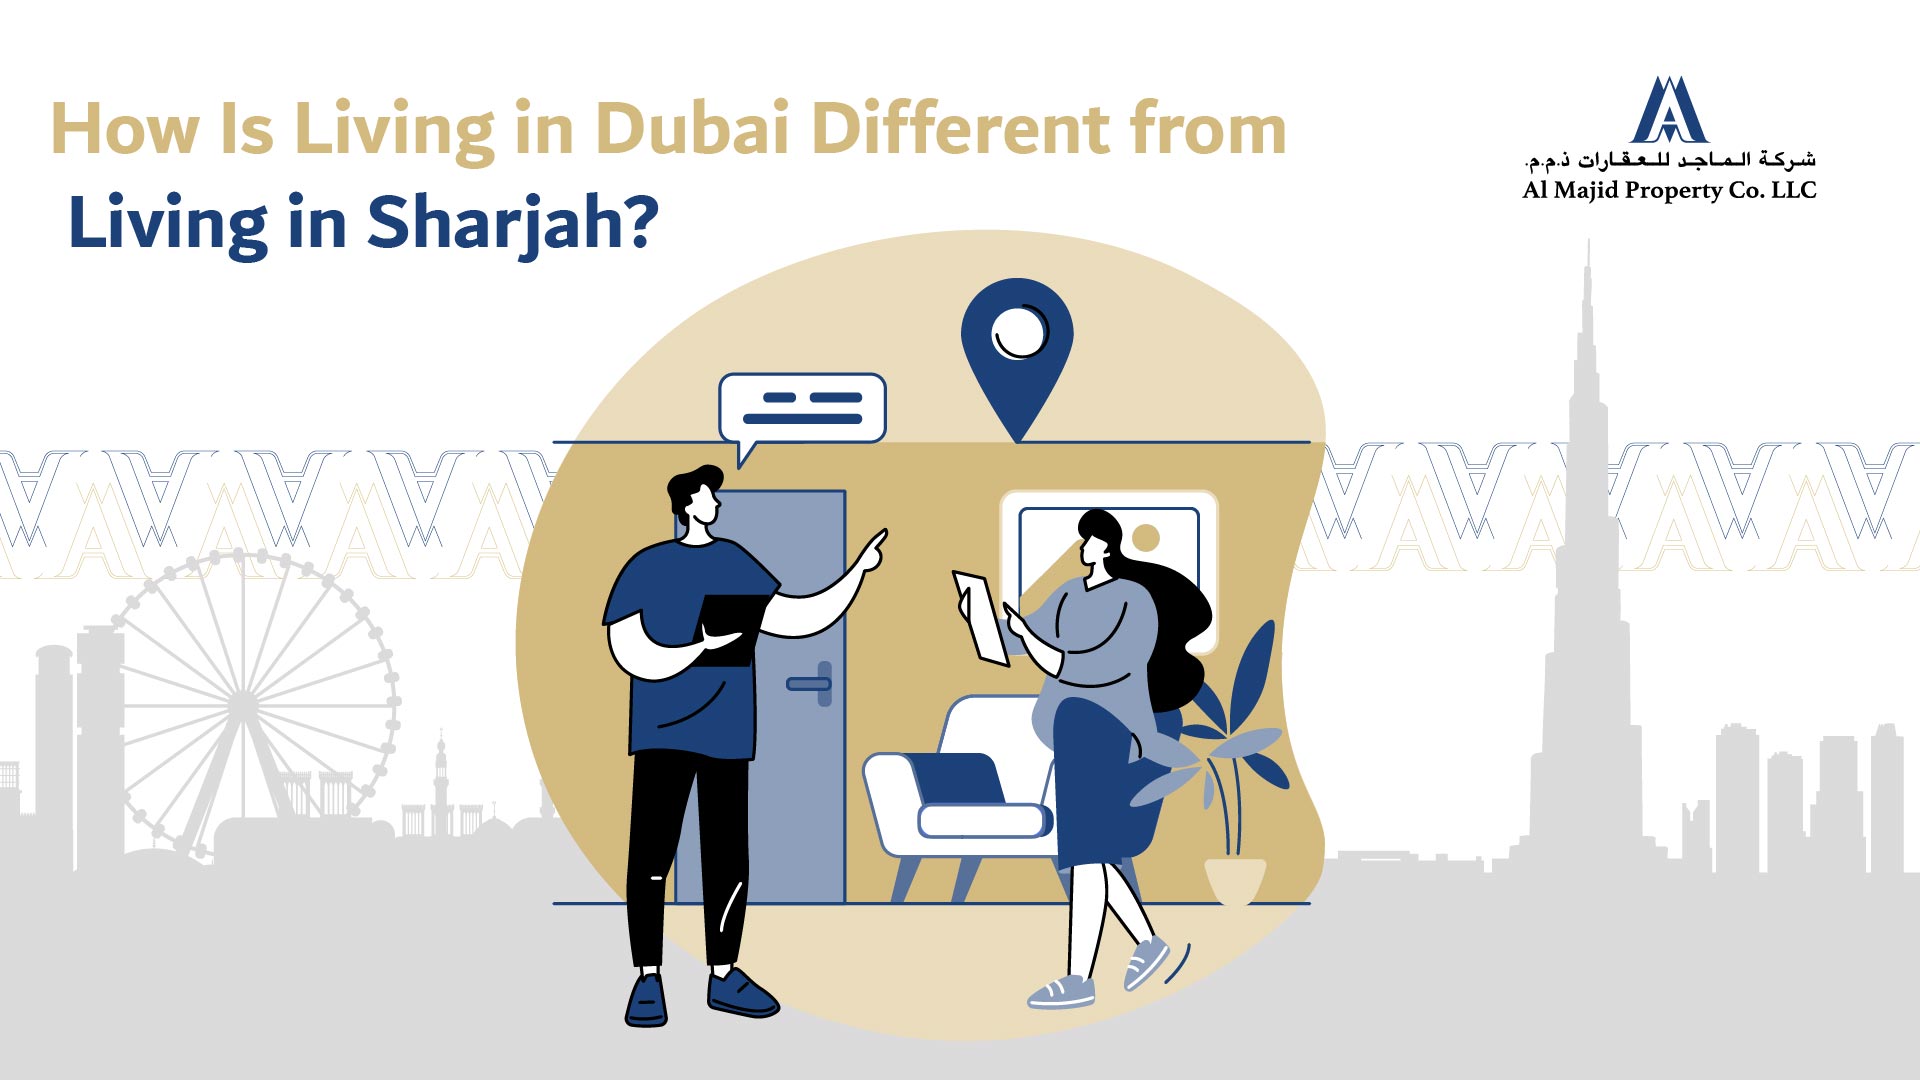 How Is Living in Dubai Different from Living in Sharjah